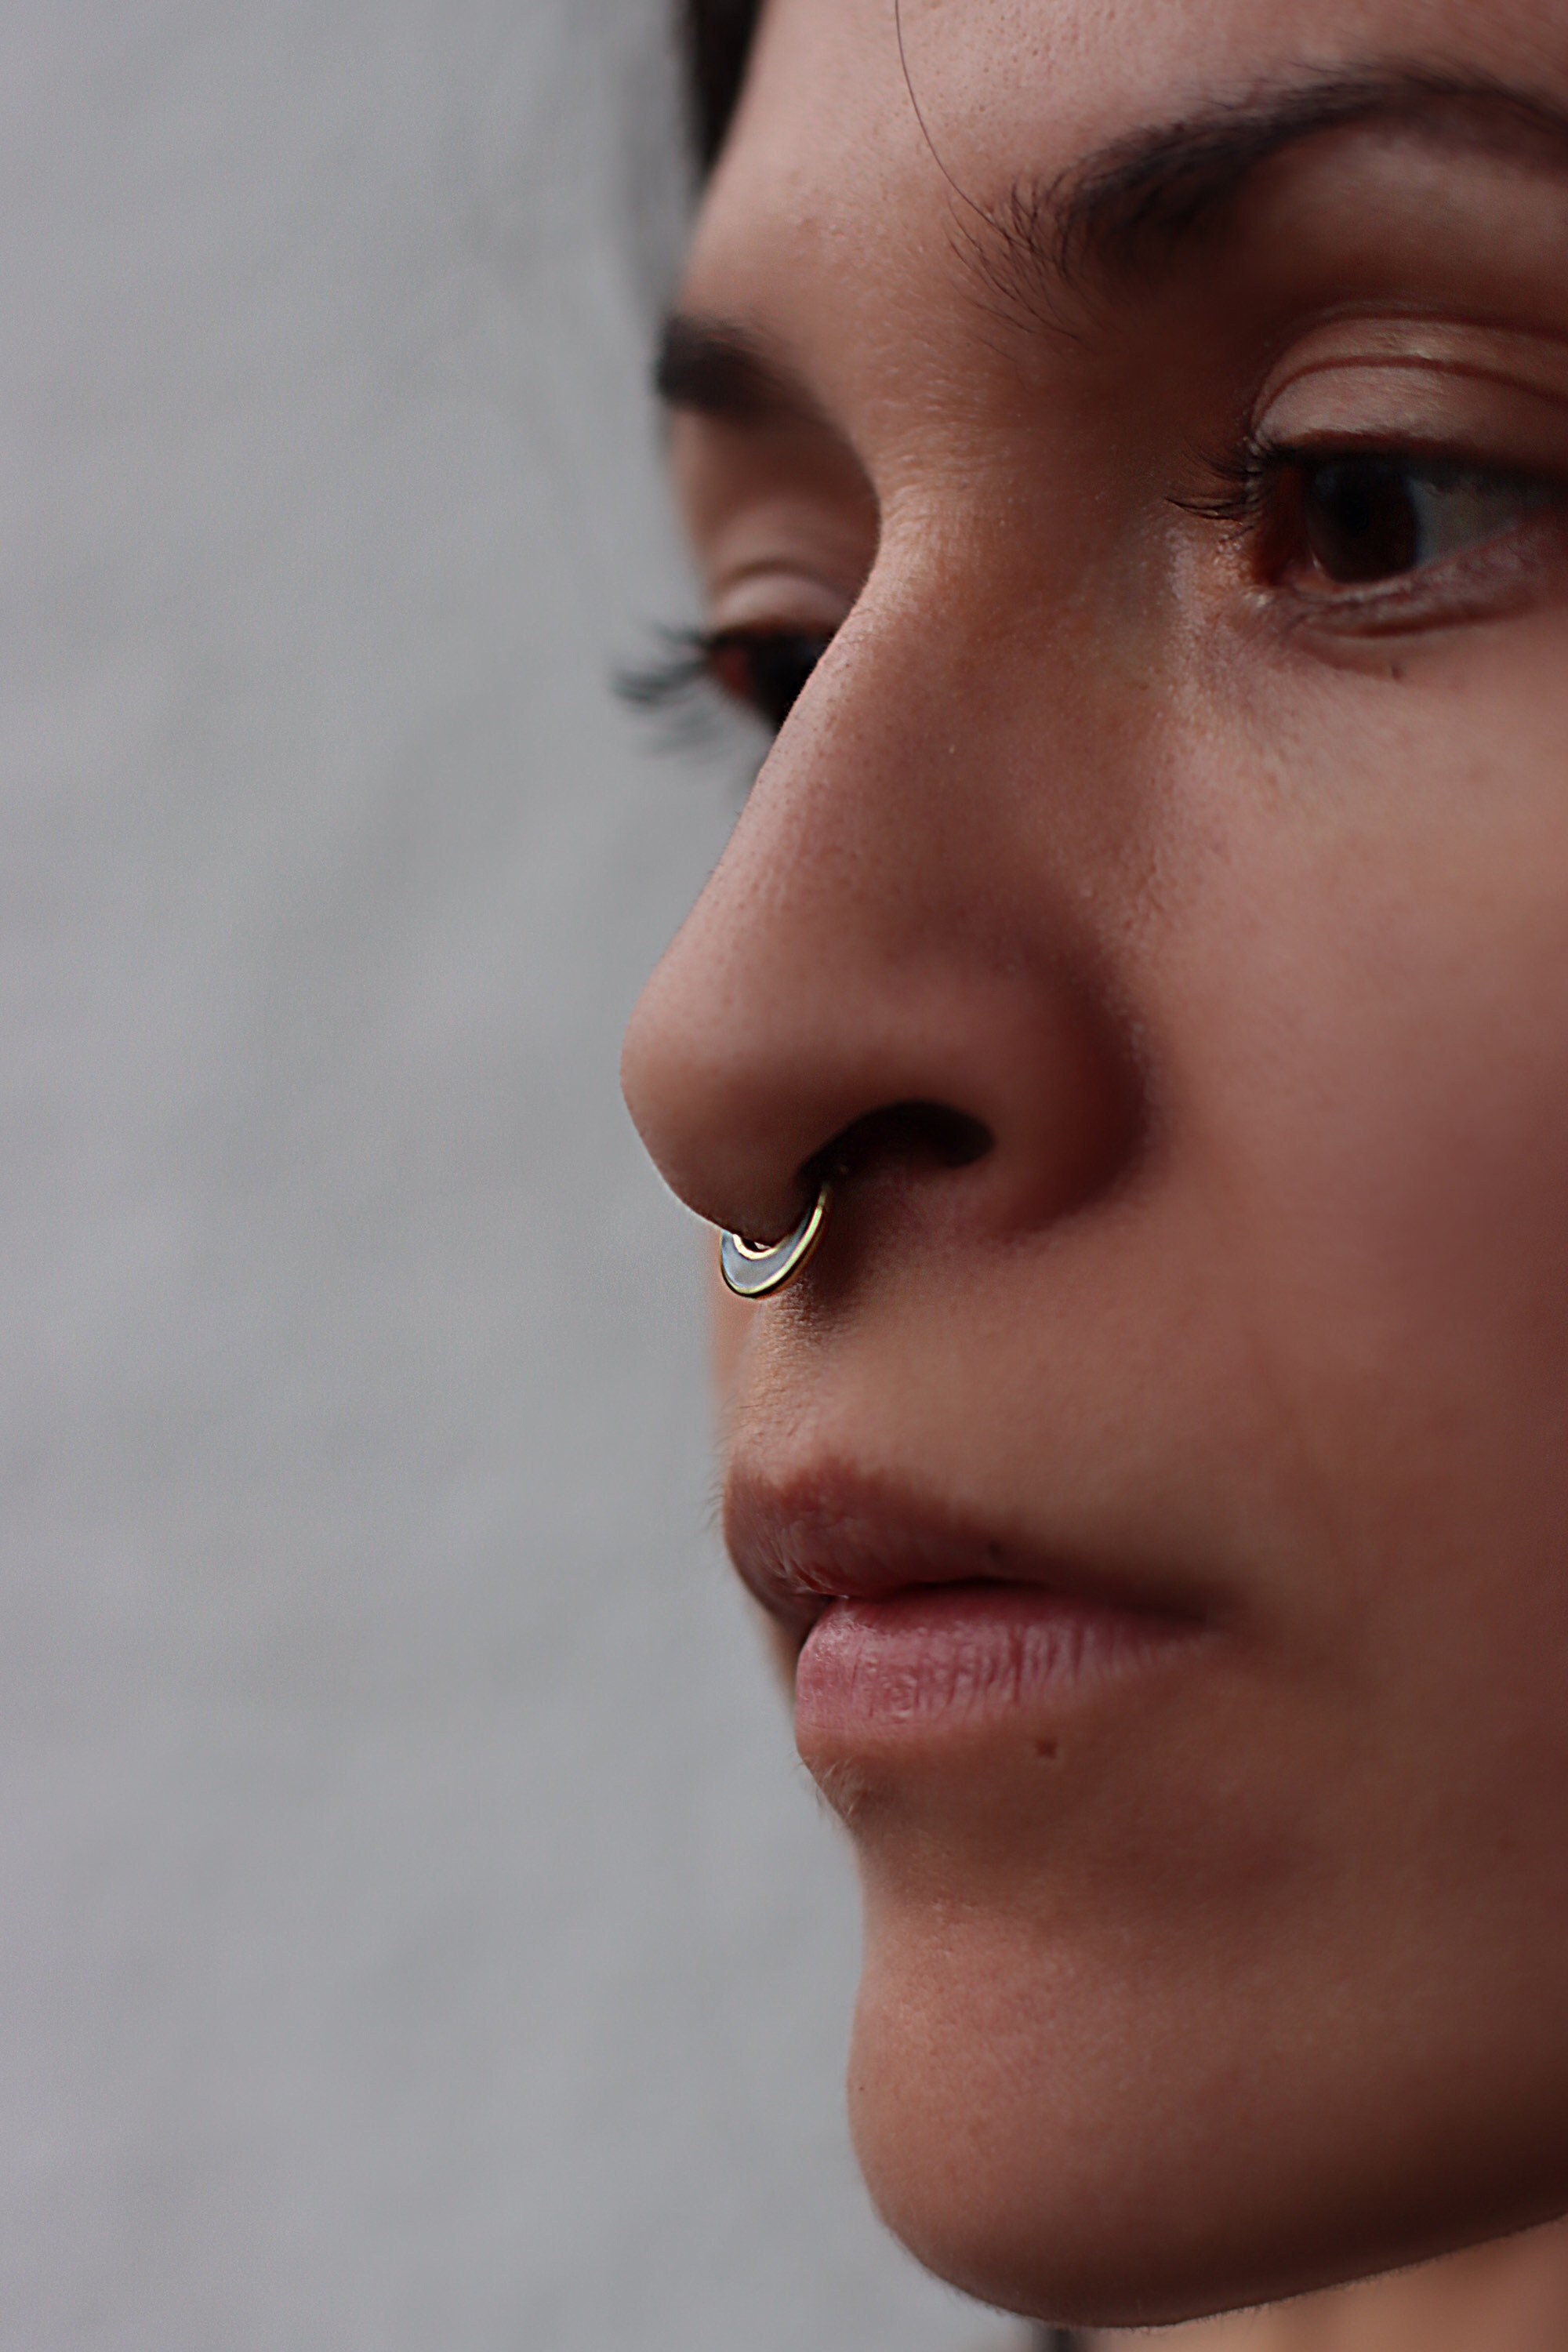 Amazon.com: Double Hoop Nose Ring Single Pierced-Silver Nose Ring Piercing-Spiral  Nose Ring-Single Pierce Double Hoop (Right Side, 6) : Handmade Products